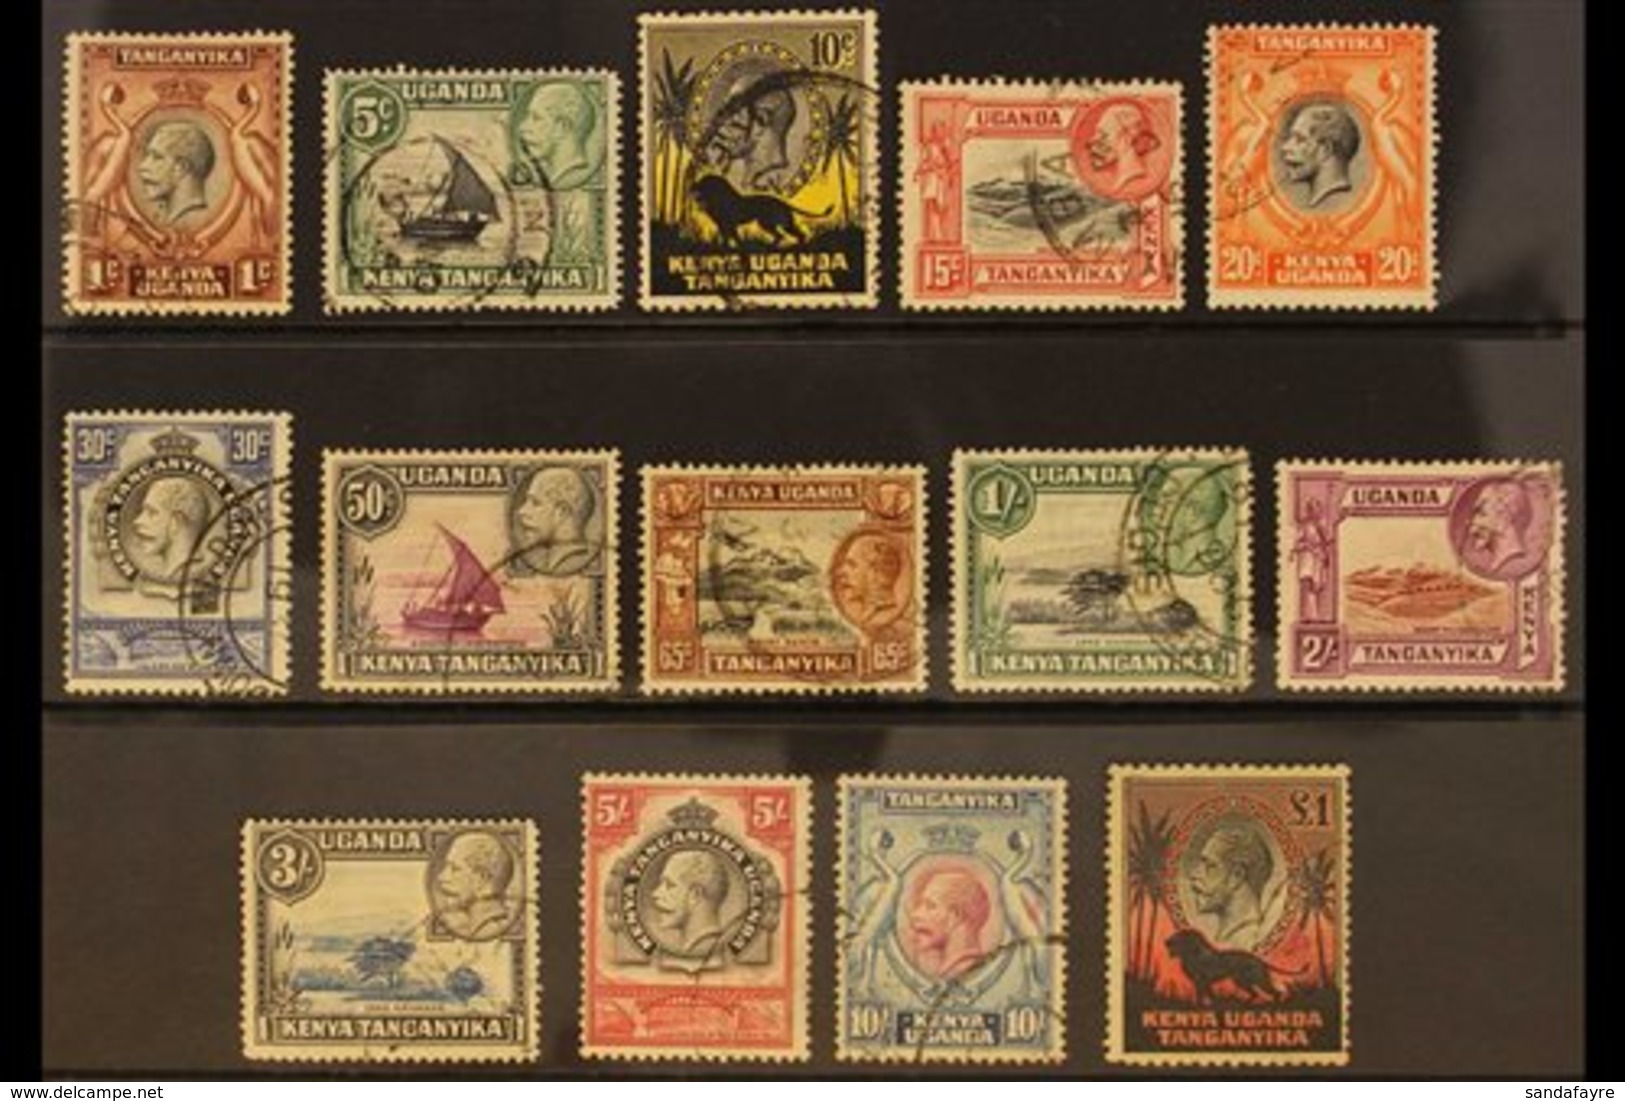 1935-37 Pictorials Complete Set, SG 110/123, Used, 10s With Small Pink Spots And £1 With Small Faults, Cat £550. (14 Sta - Vide